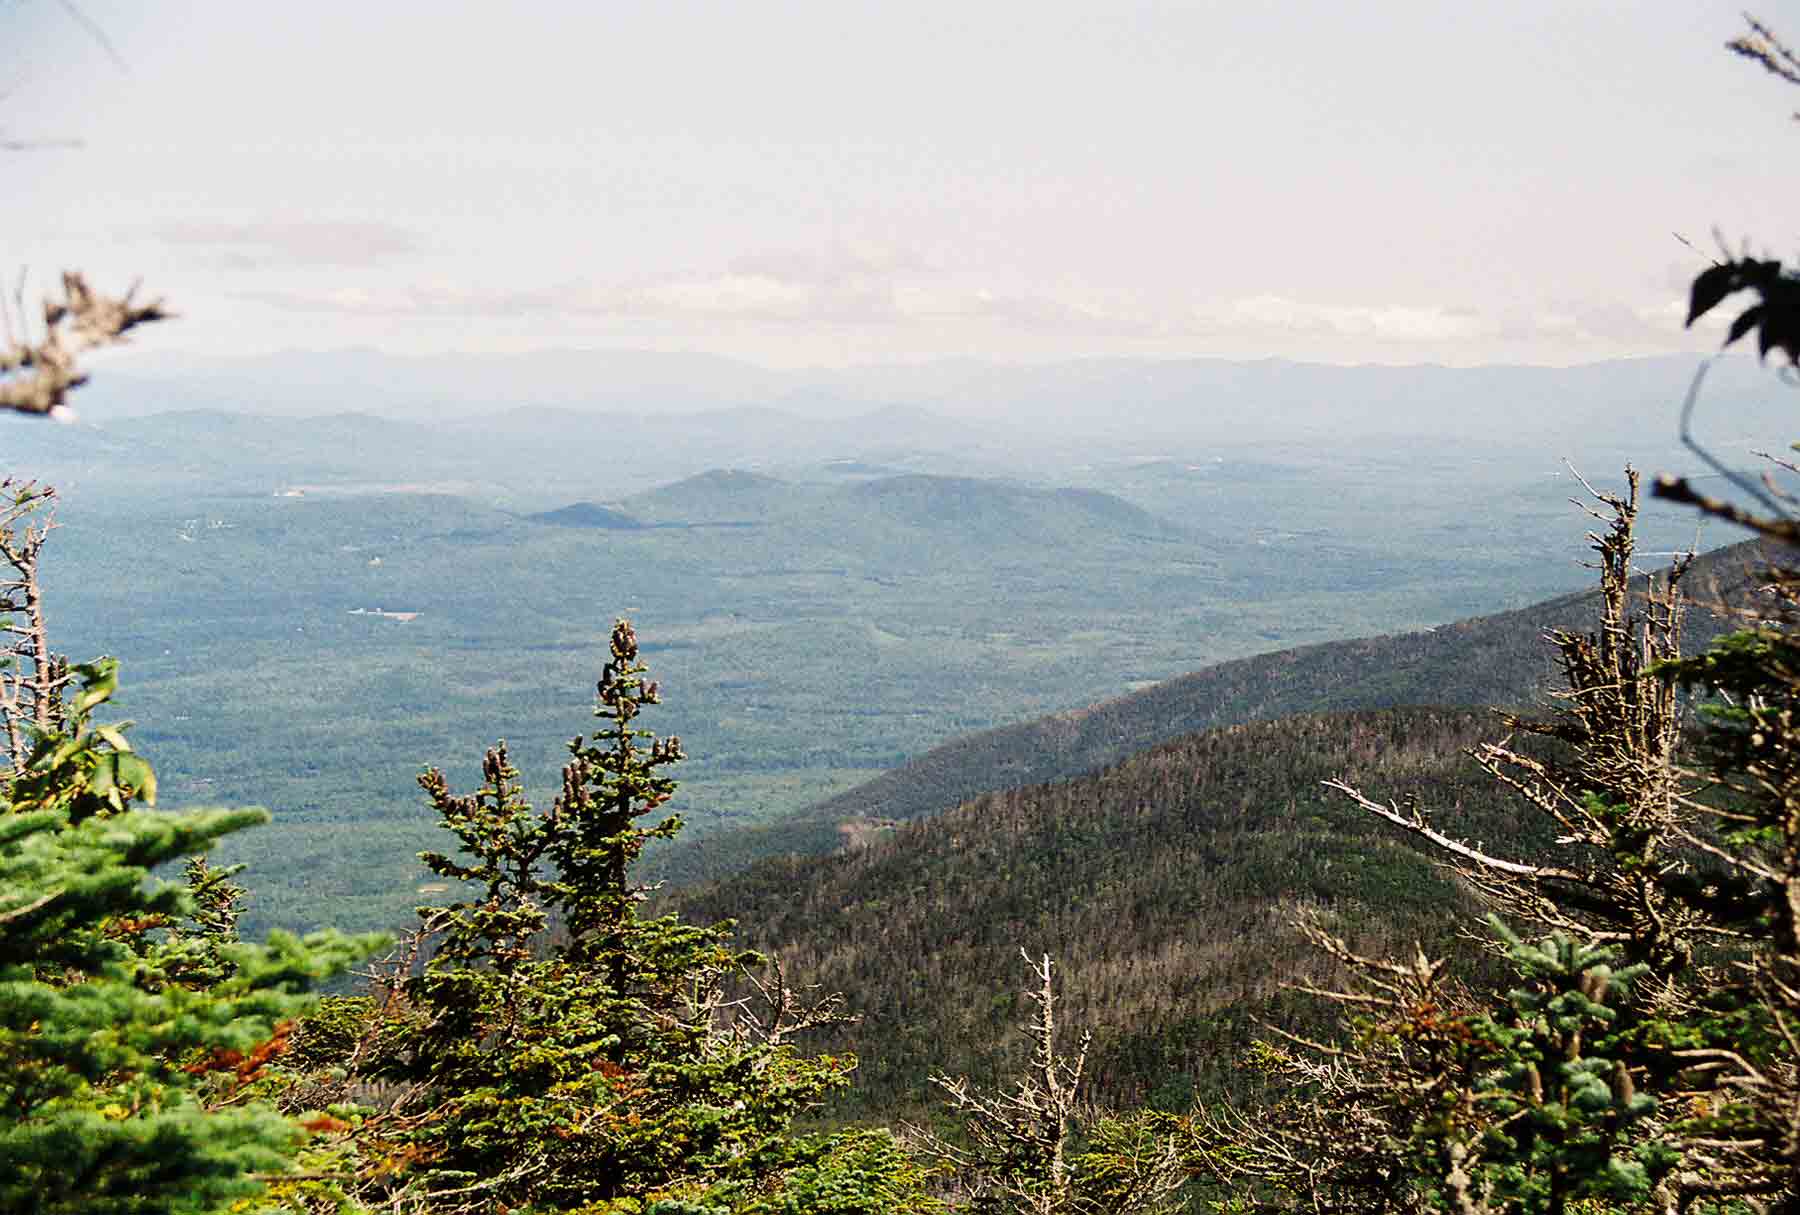 View W from Kinsman Ridge Trail (AT) on north side of North Kinsman Mt.  Courtesy dlcul@conncoll.edu